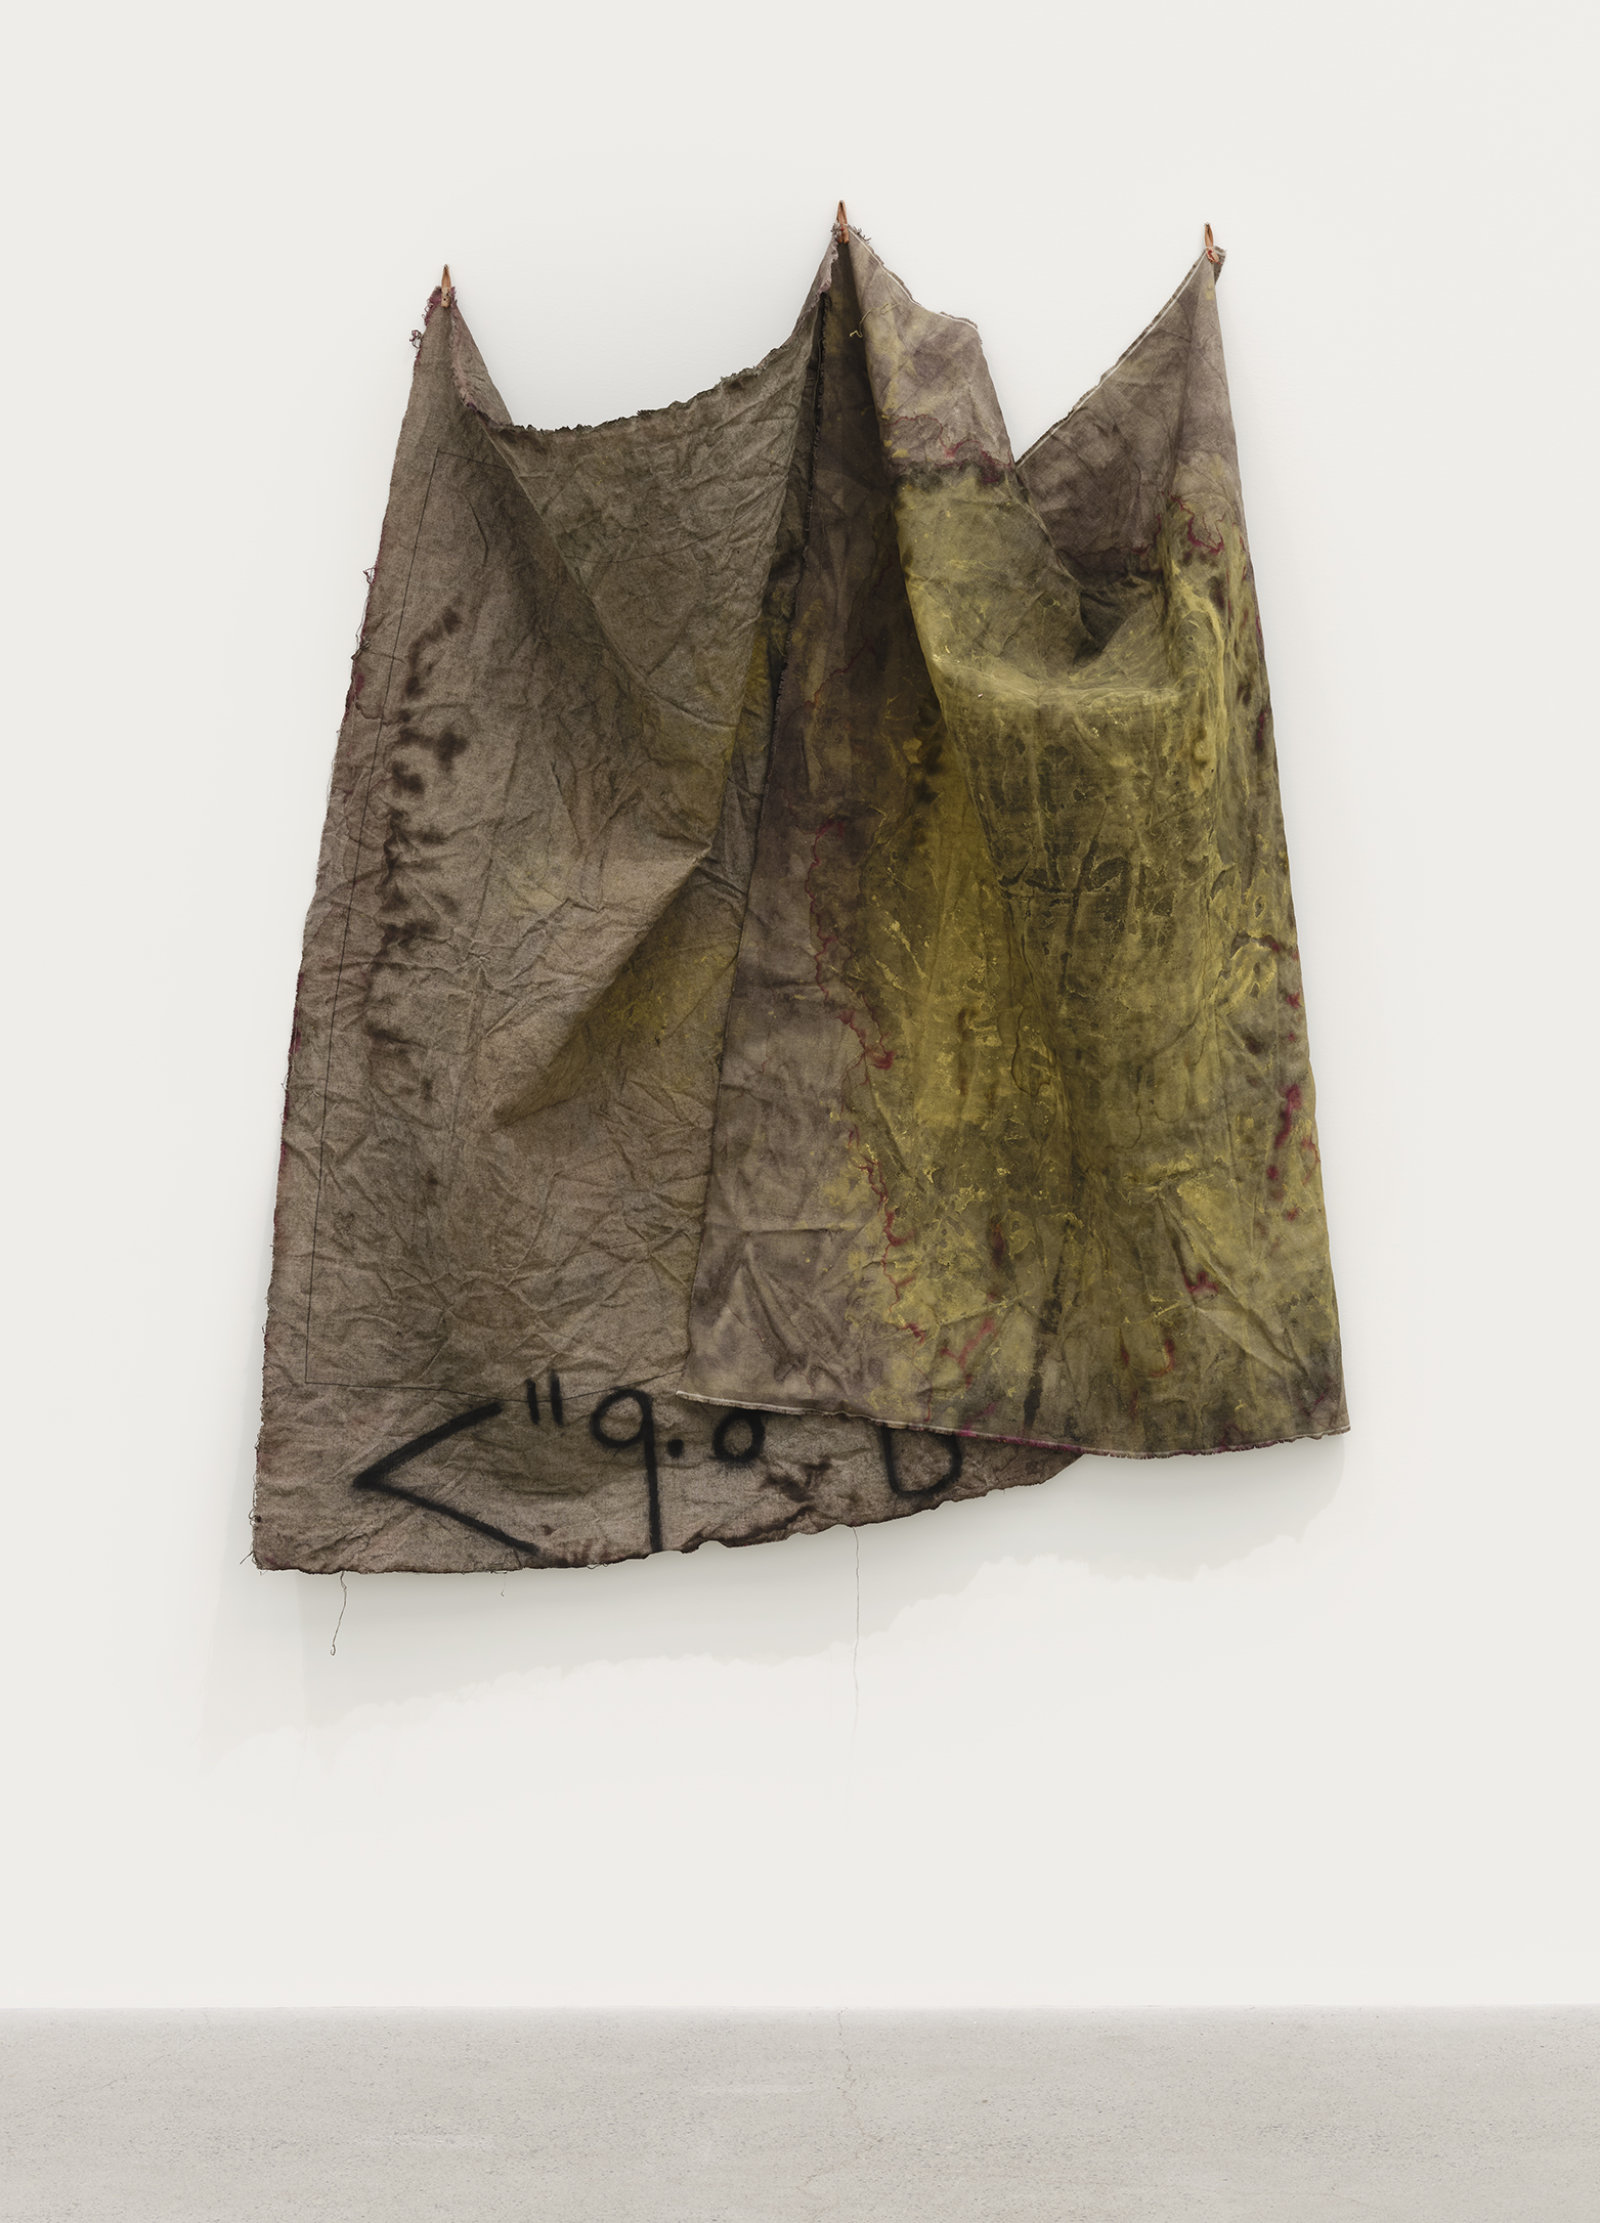 Duane Linklater, aspirated fragment, 2021, digital print on linen, cochineal dye, yellow ochre, honey, charcoal, nails, 62 x 49 x 12 in. (158 x 125 x 31 cm)